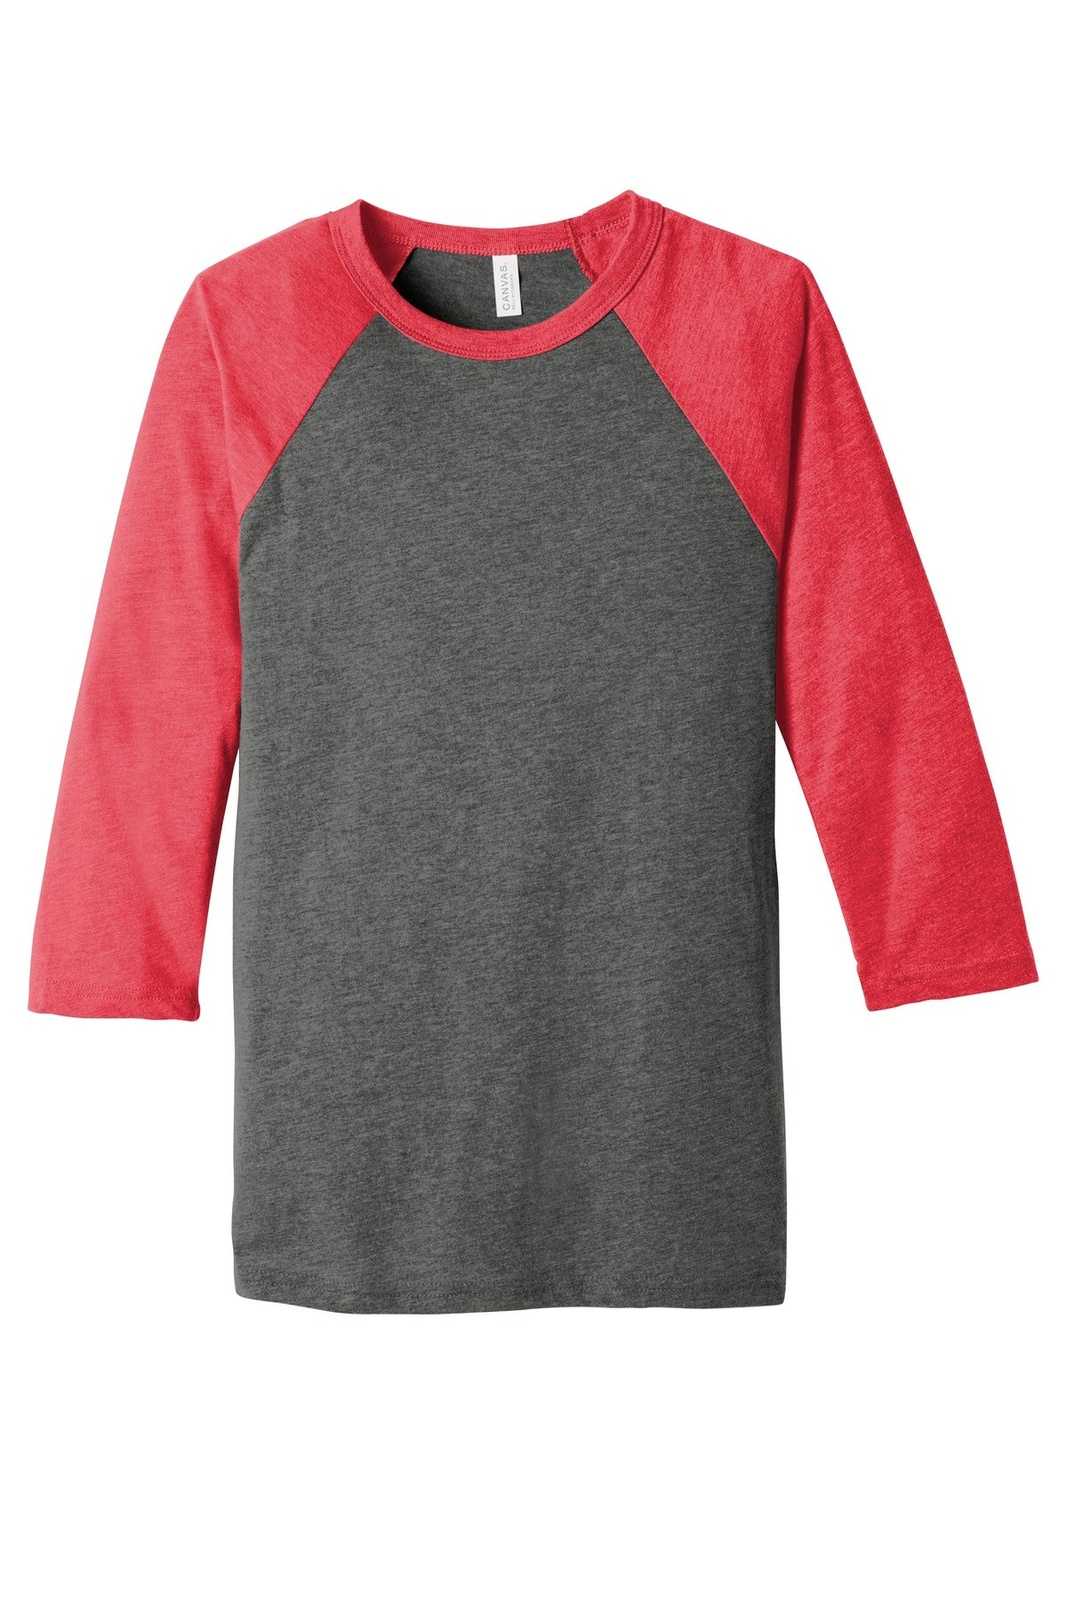 Bella + Canvas 3200 Unisex 3/4-Sleeve Baseball Tee - Gray Red Triblend - HIT a Double